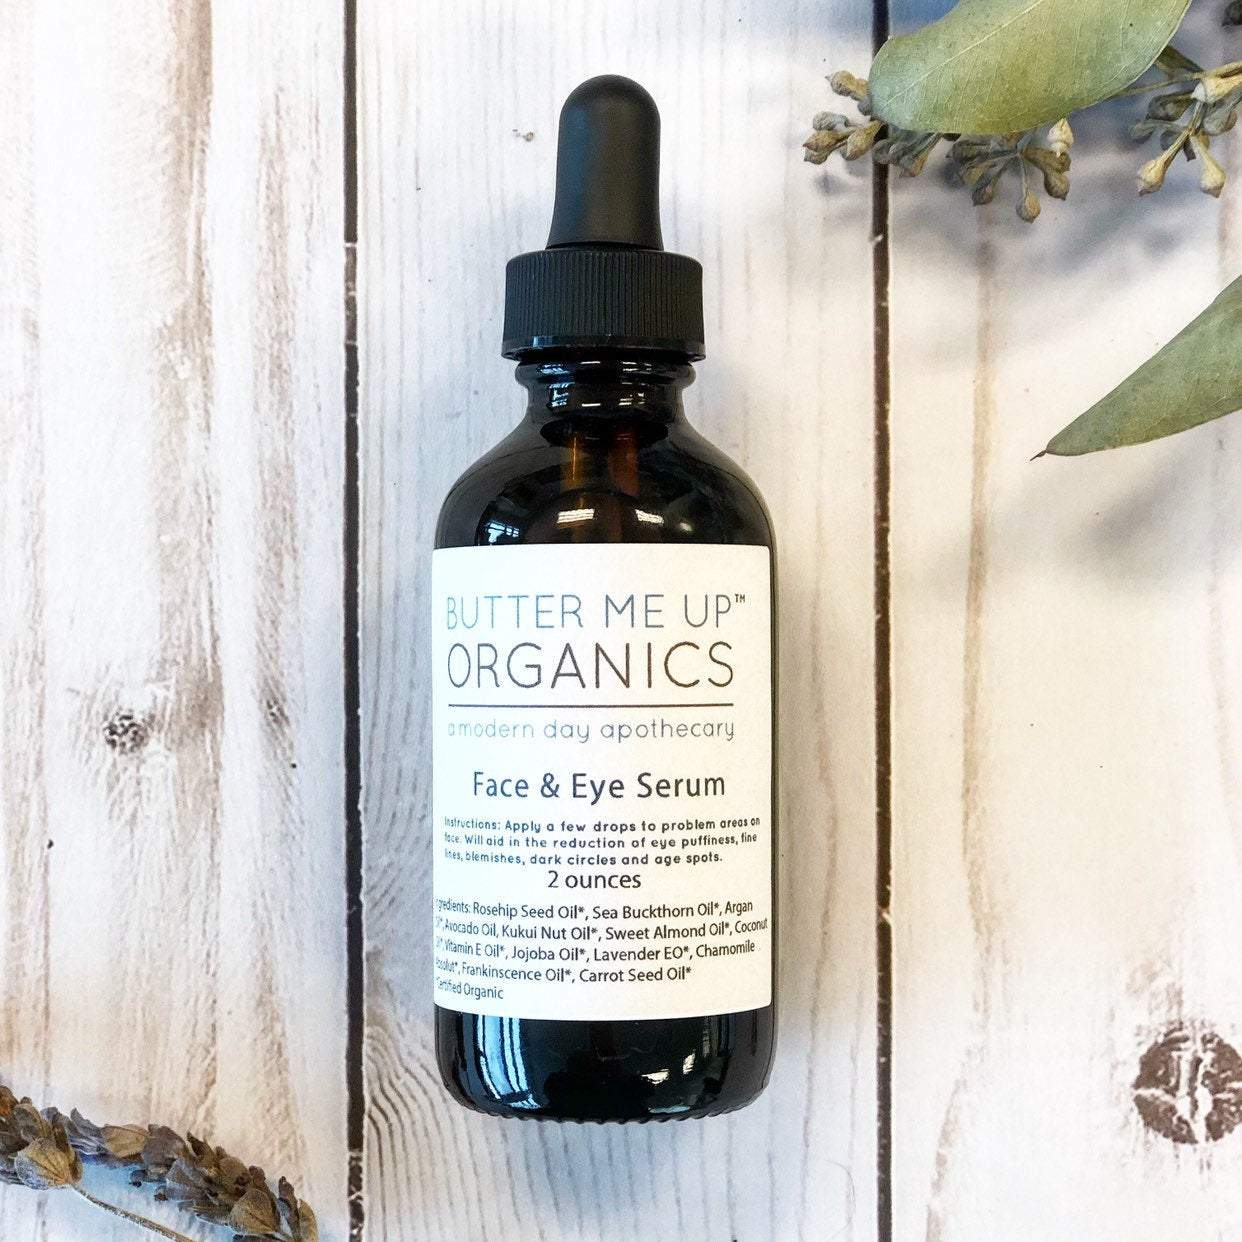 Organic Vegan Cruelty-Free Face & Eye Serum - Roses & Chains | Fashionable Clothing, Shoes, Accessories, & More